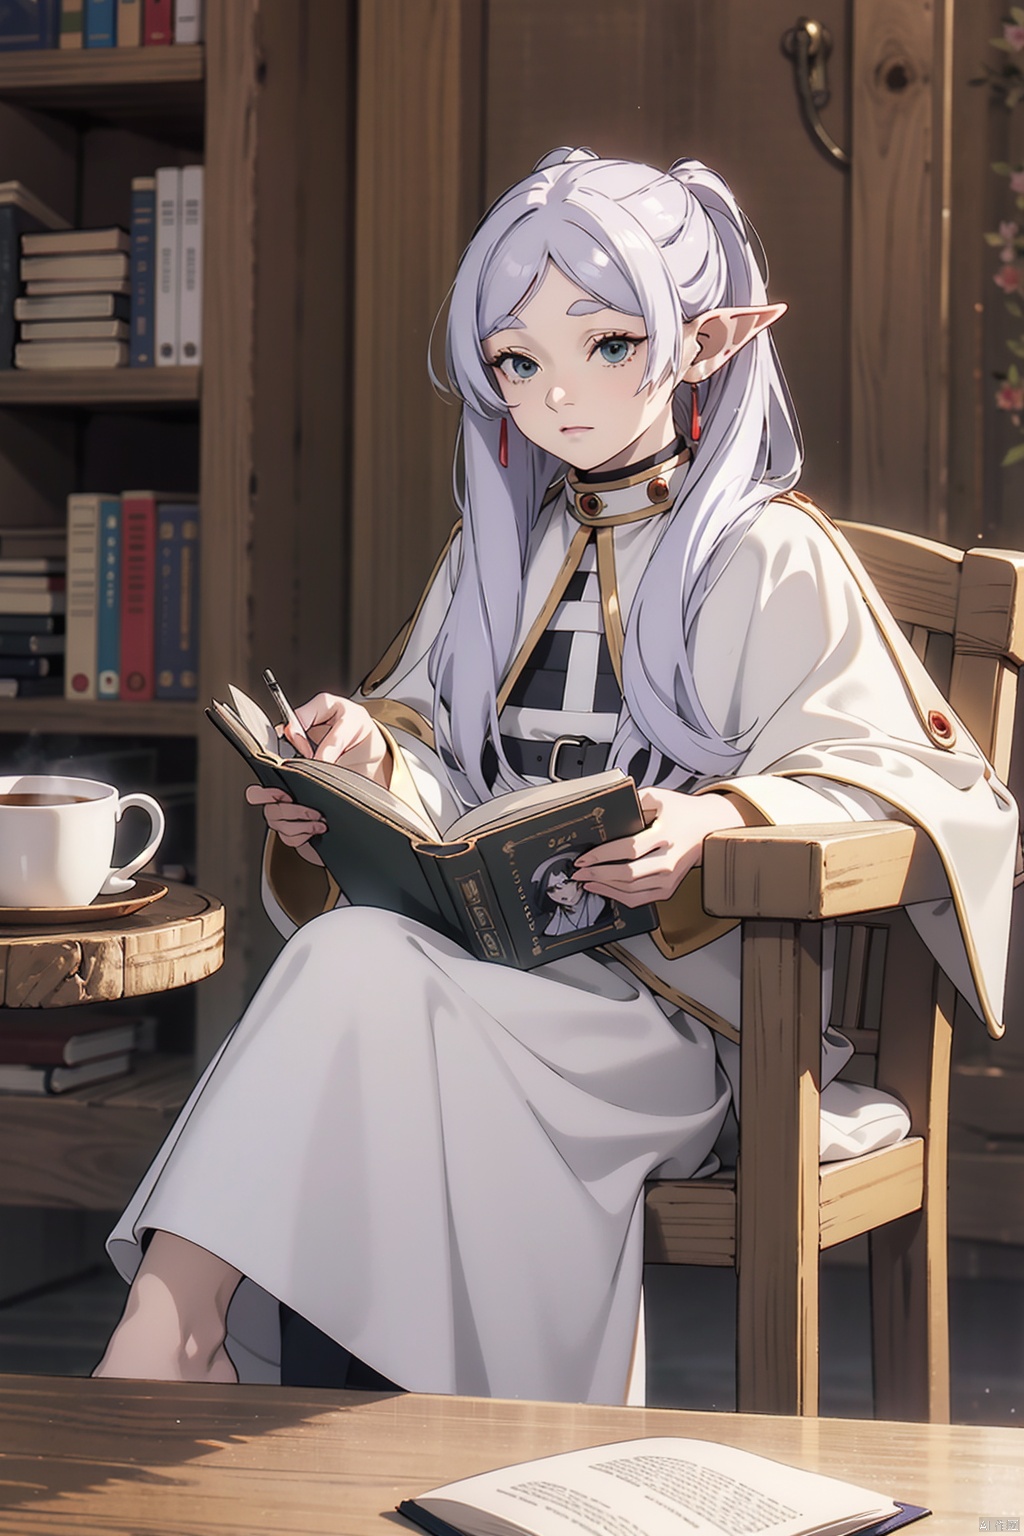  Frieren at the Funeral,Goblin ear,1 girl,knowledge of patchouli,solo,white hair,long hair,cup,hat,new moon,tea cup,book,sitting,ribbon,reading,cloak,chair,tea,anime coloring,hair bow,treeribbon,,